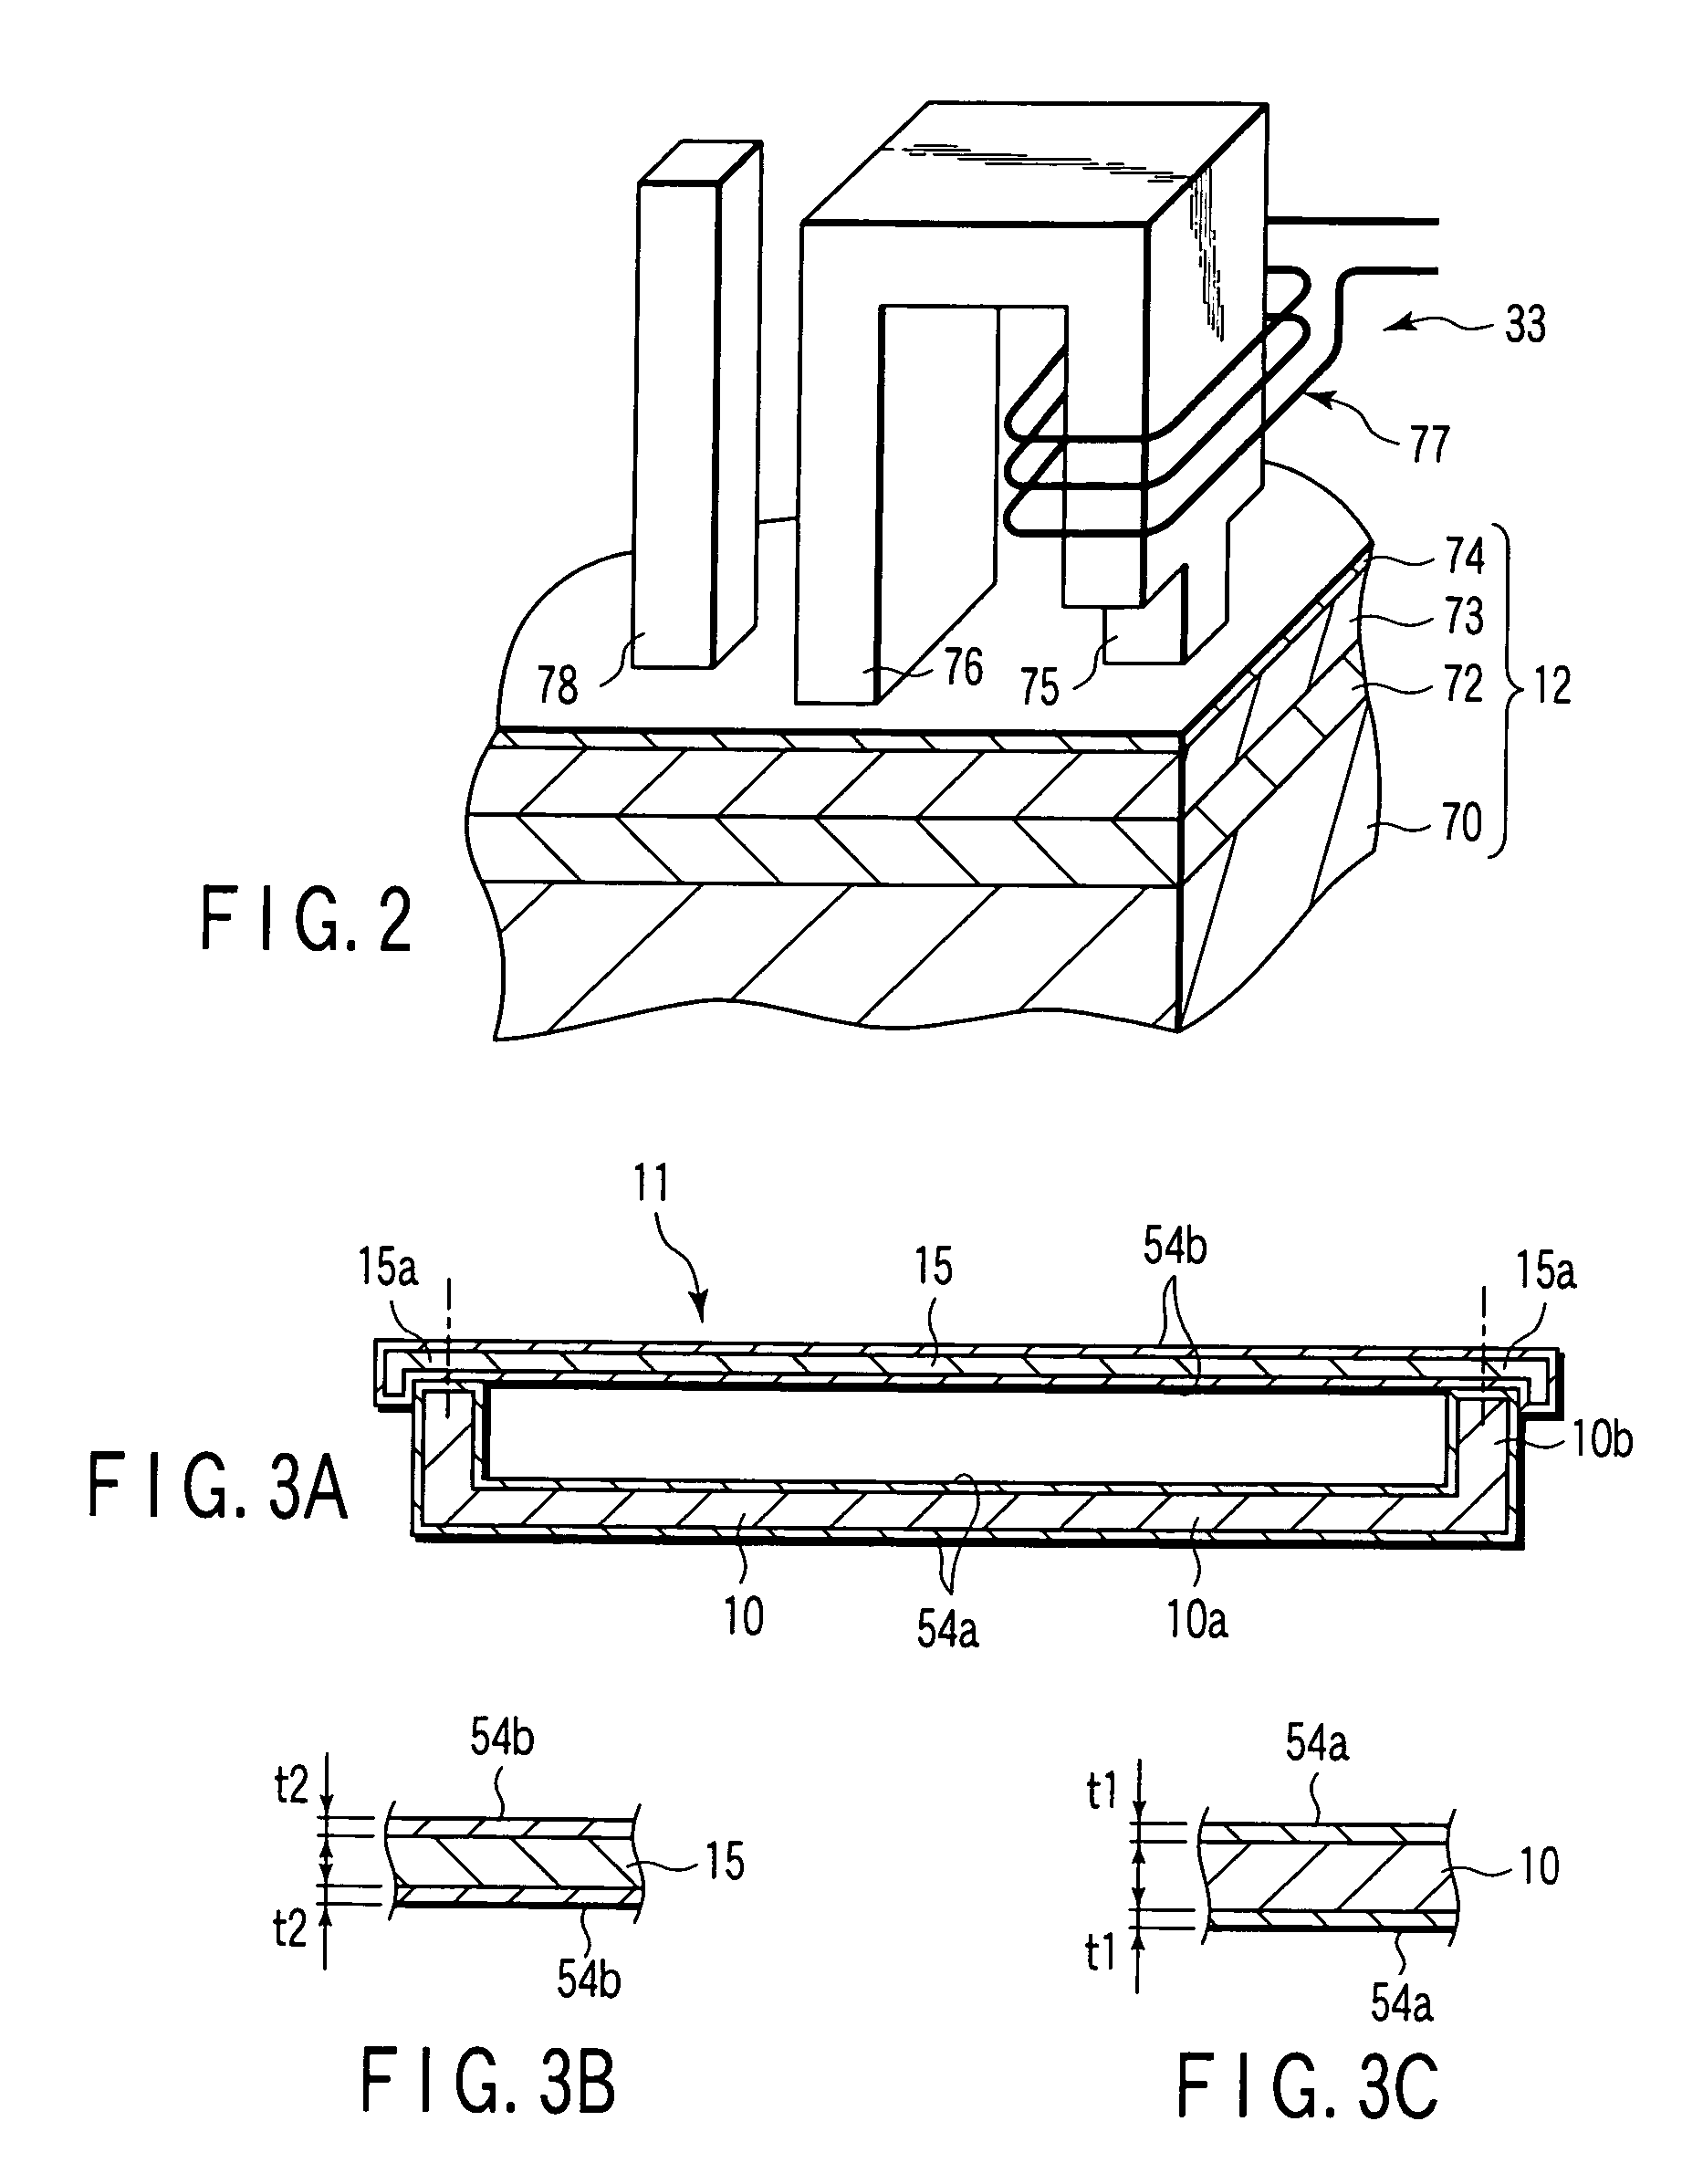 Disk drive with non-magnetic cover and base plated with conductively connected magnetic shielding layers